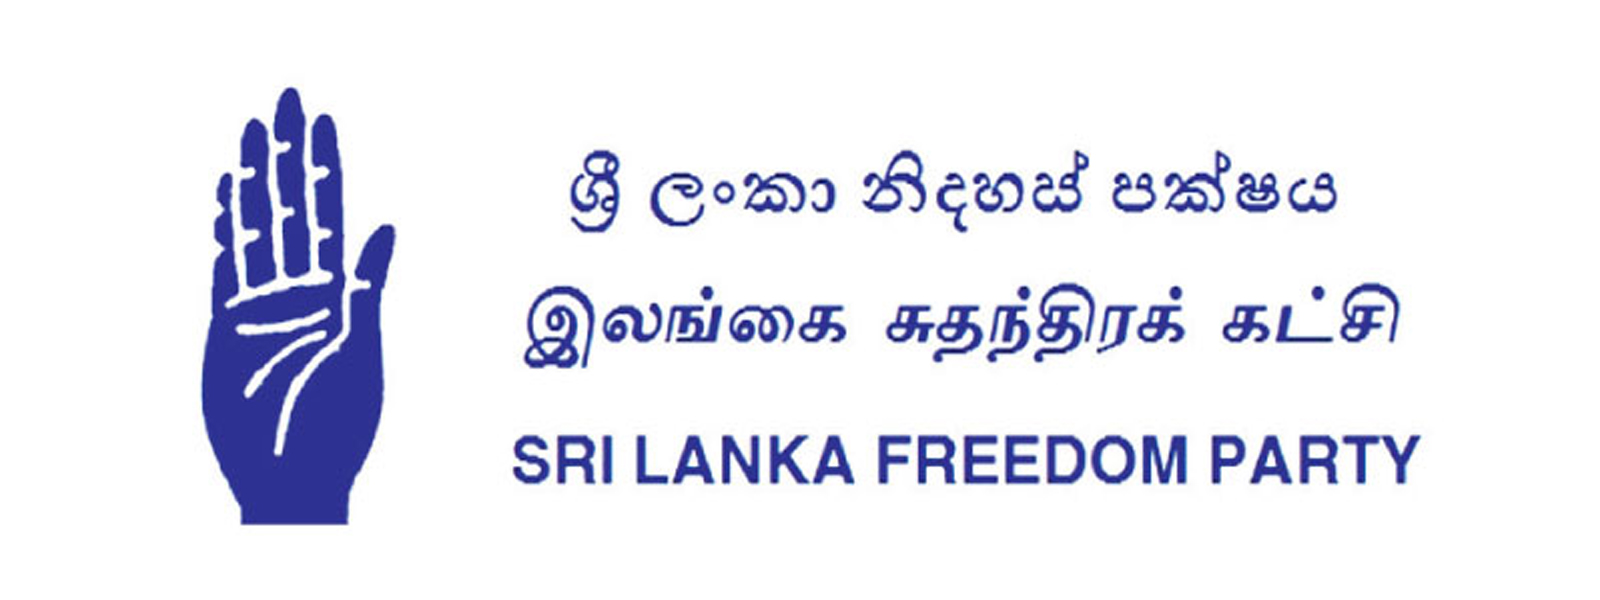 Central Committee of the SLFP to convene tomorrow